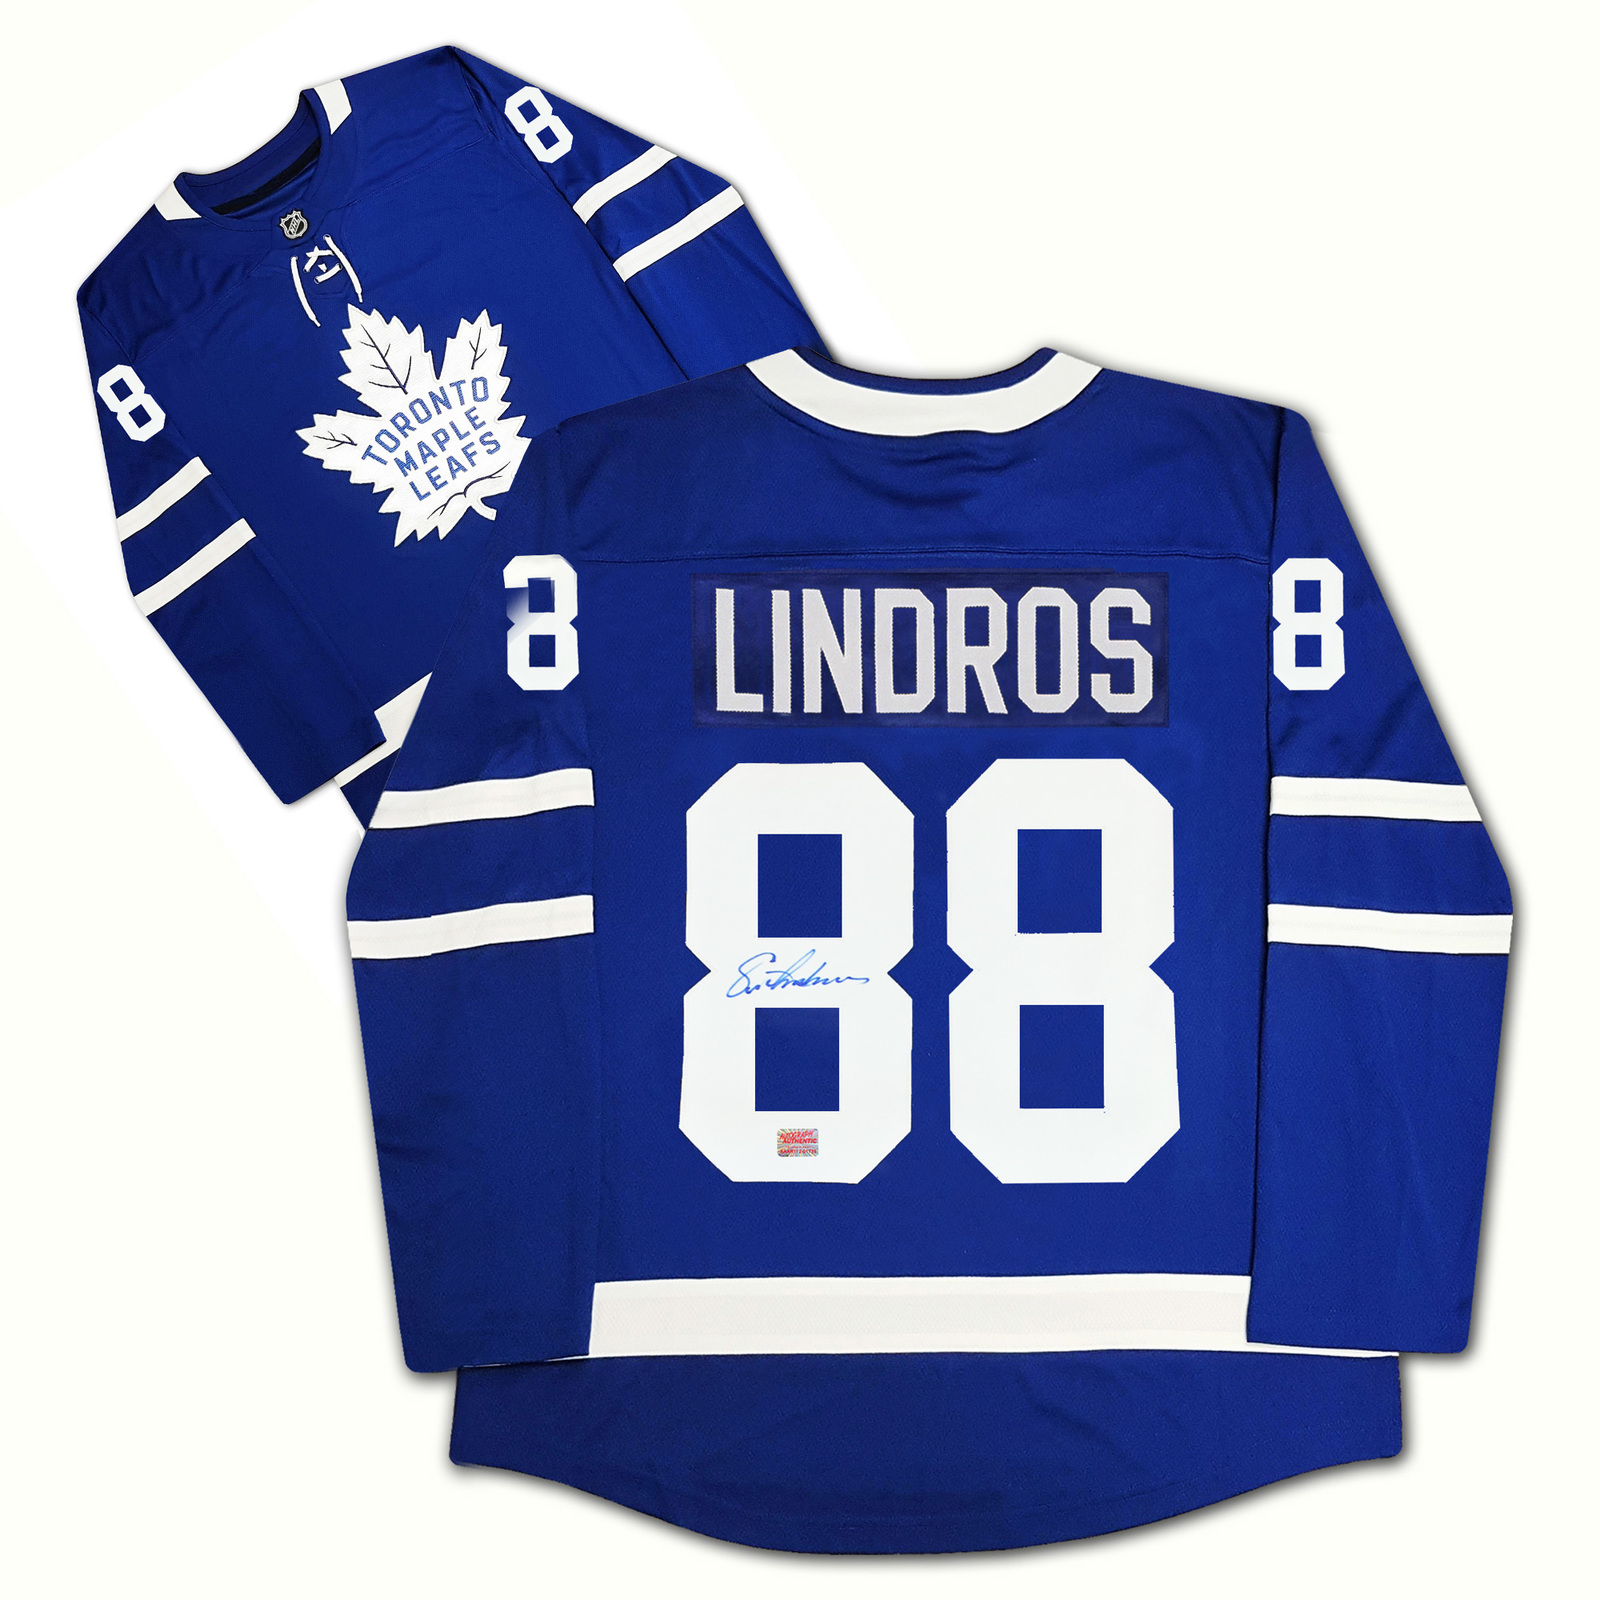 Primary image for Eric Lindros Autographed Toronto Maple Leafs Jersey